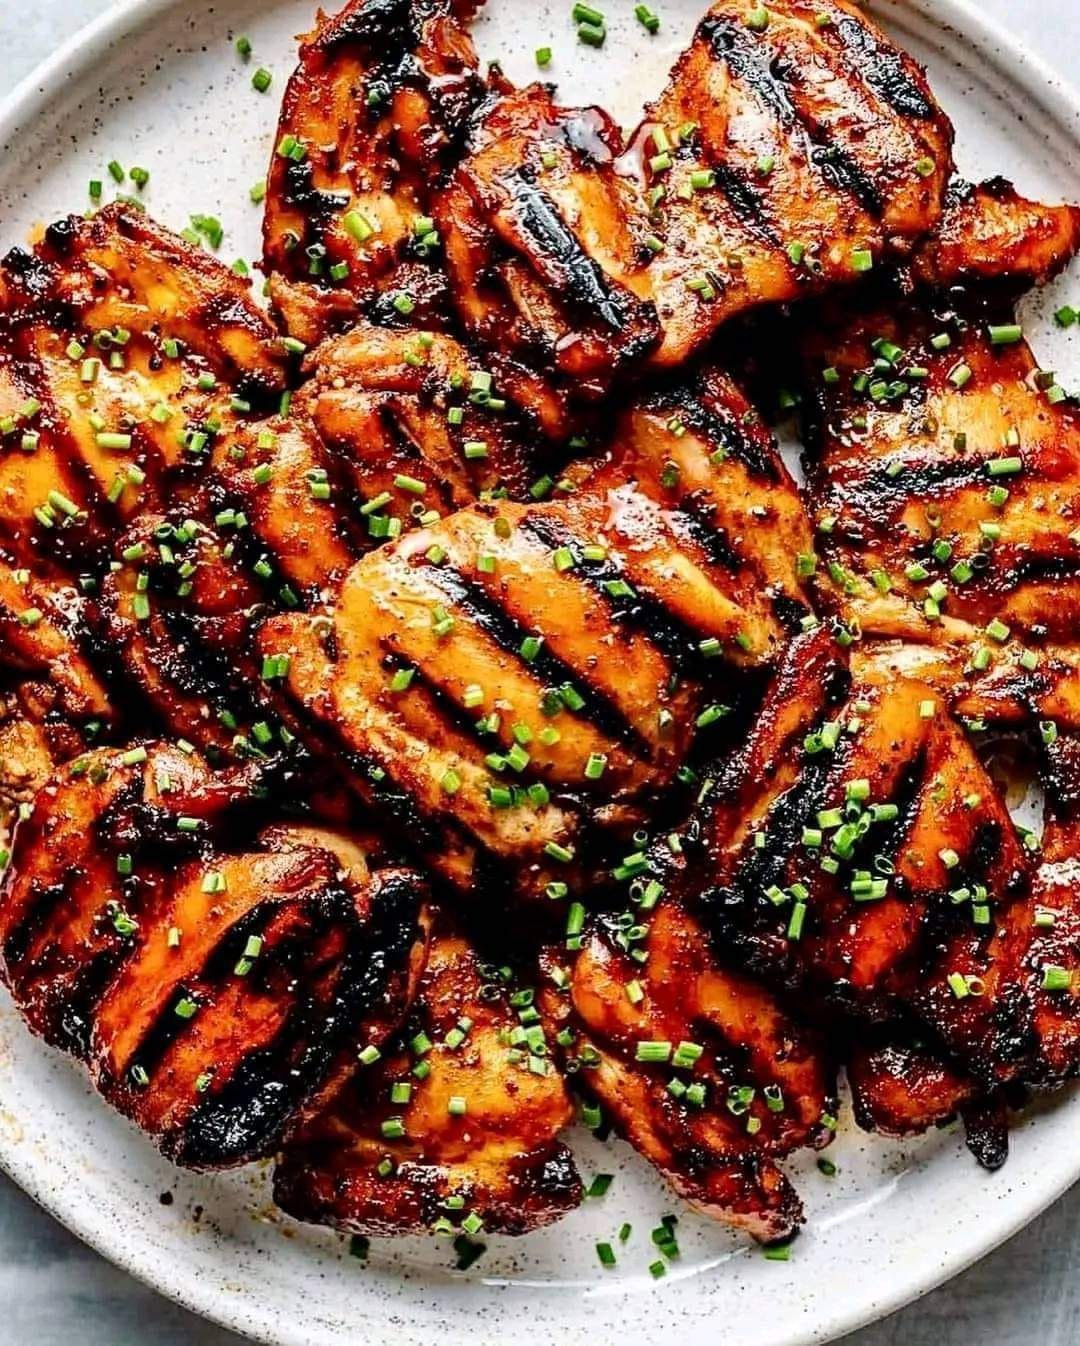 Juicy, sweet and smoky, my GRILLED HONEY BUTTER CHICKEN